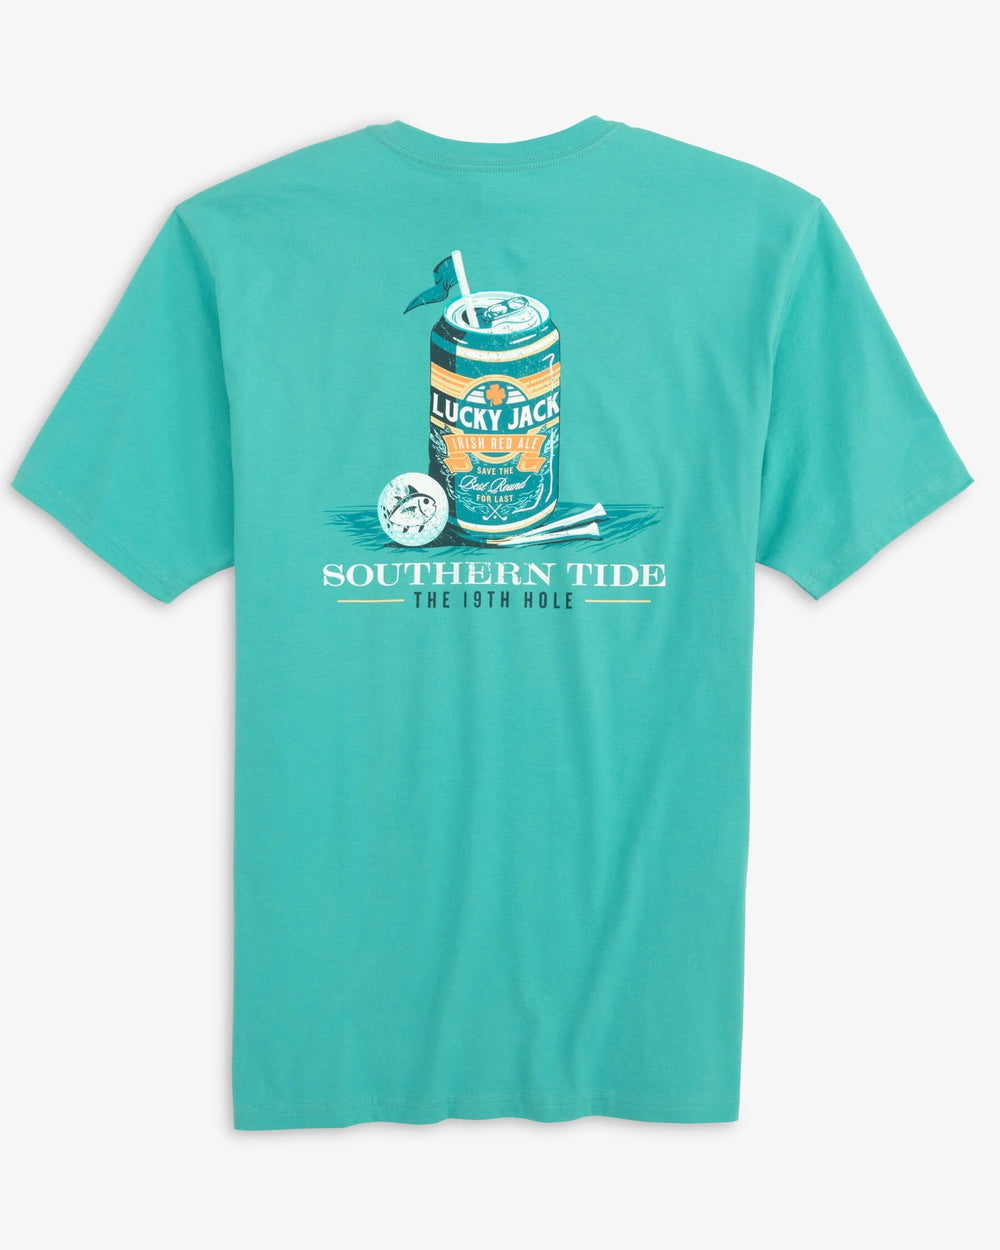 The back view of the Southern Tide Lucky Jacks 19th Hole T-Shirt by Southern Tide - Tidal Wave